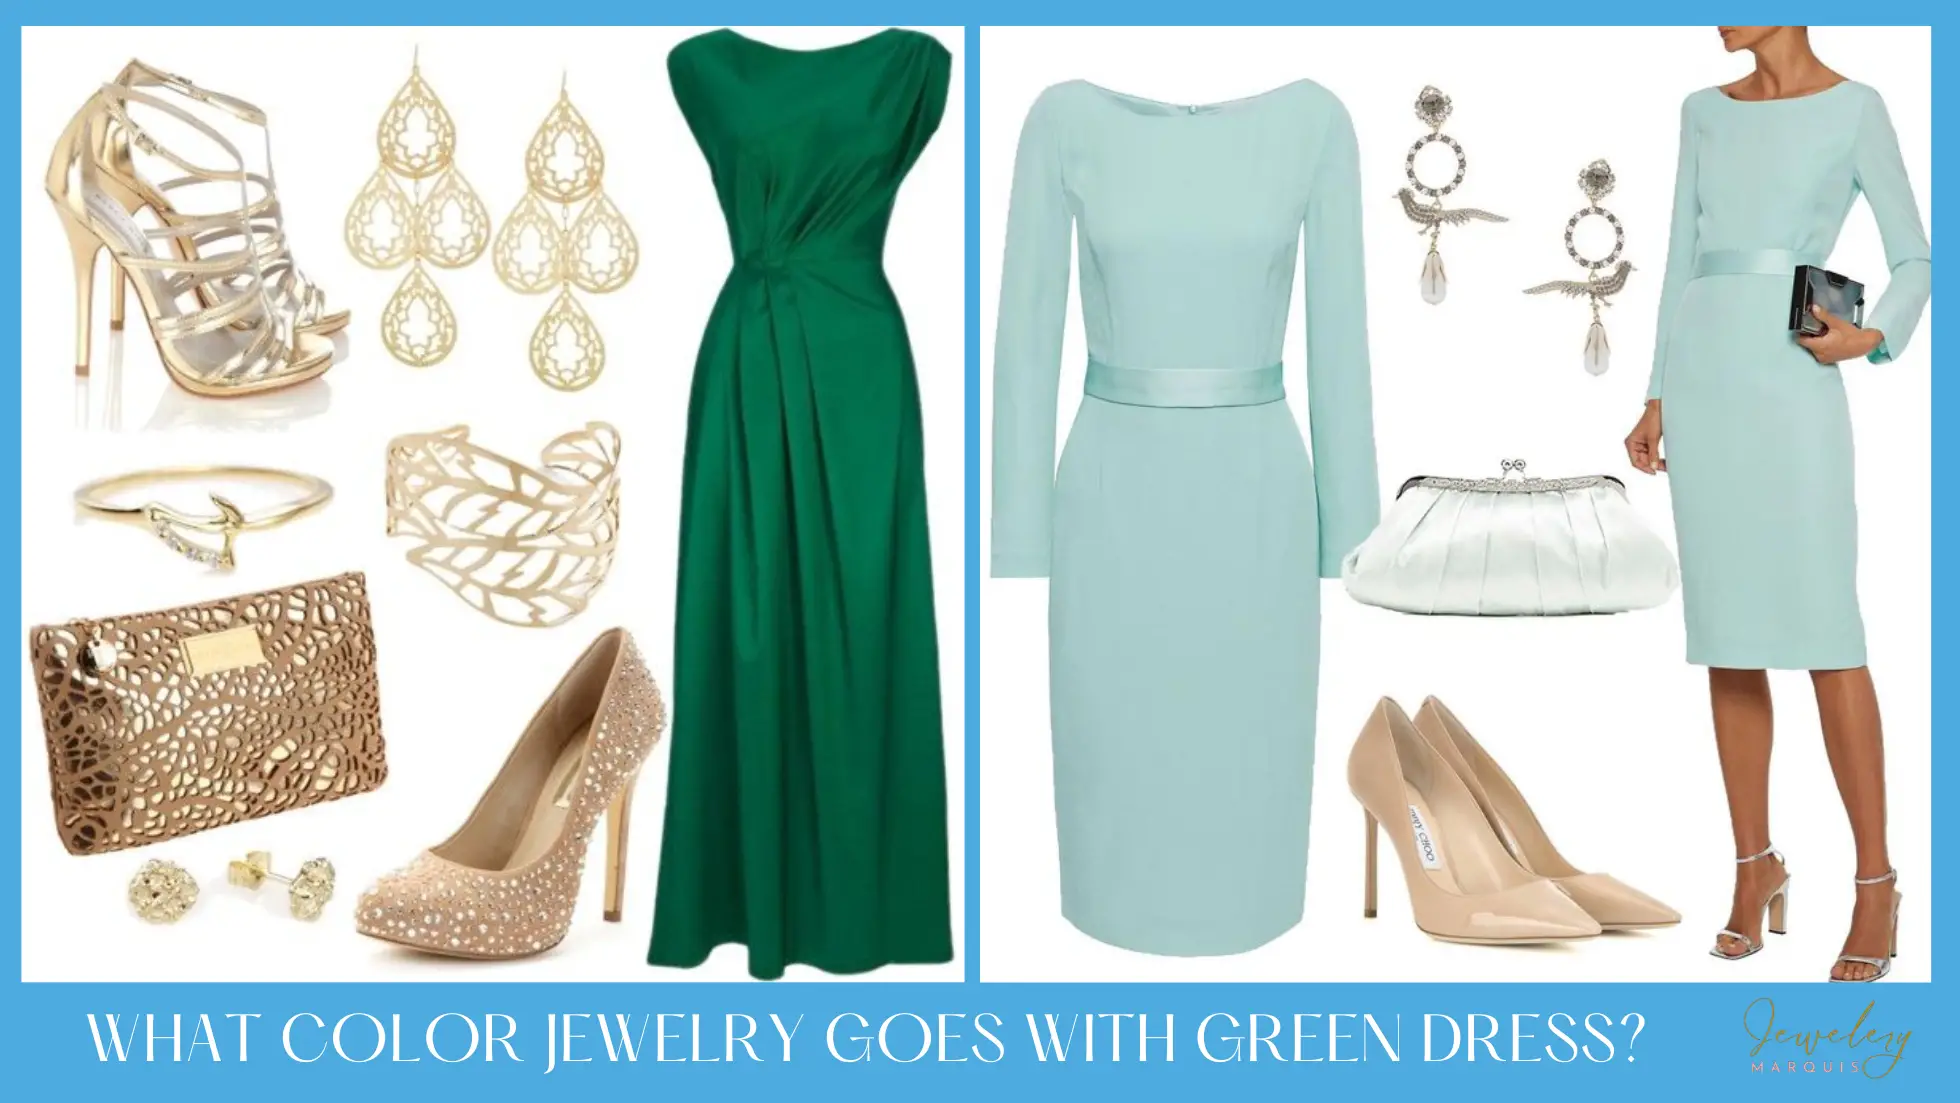 What color jewelry goes with a green dress?